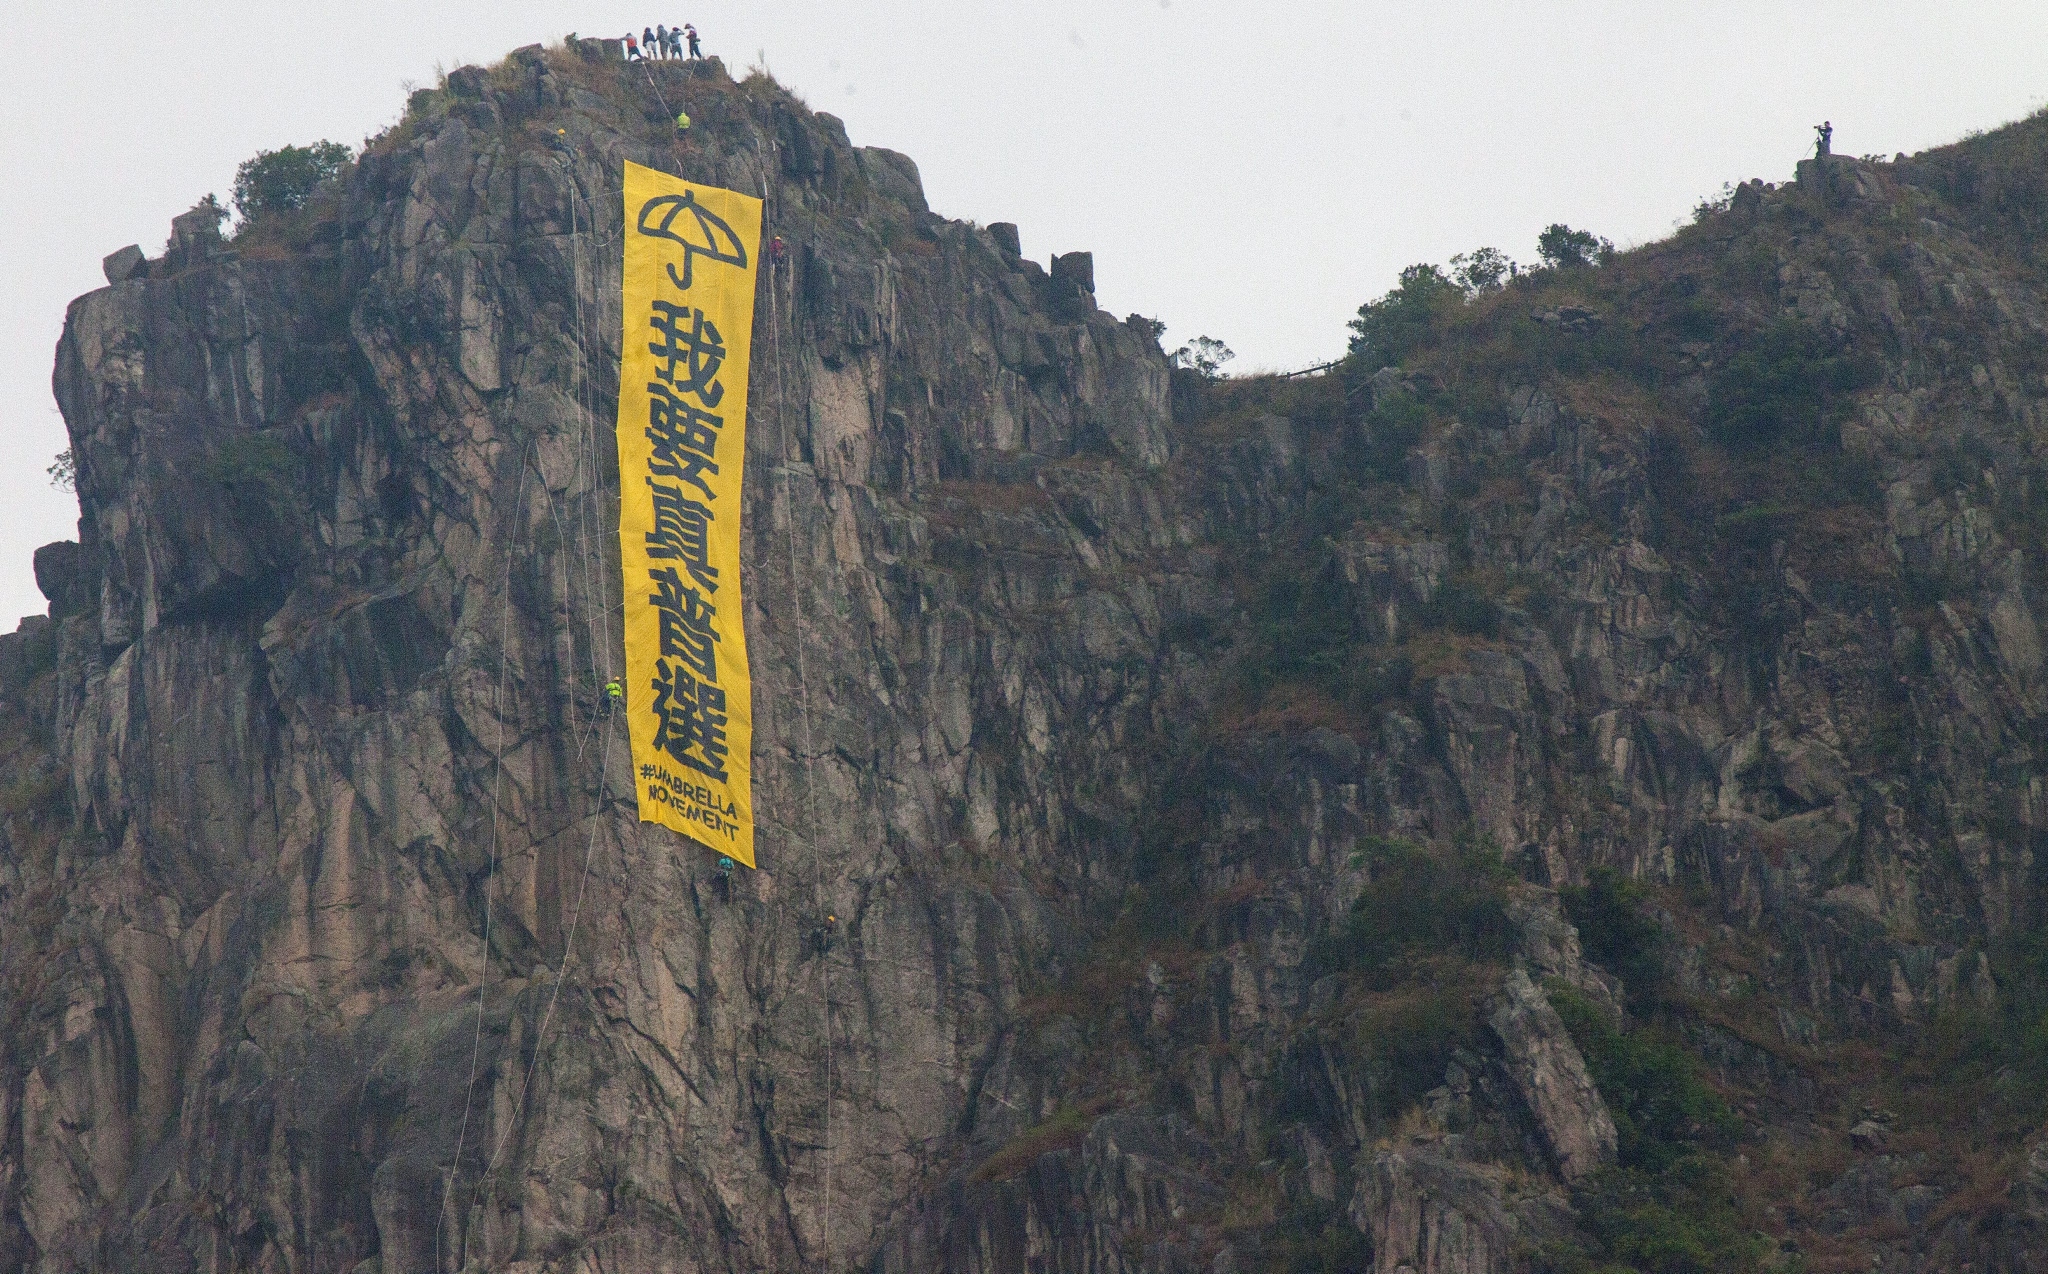 A banner calling for universal suffrage hangs on the iconic Lion Rock. Photo: EPA